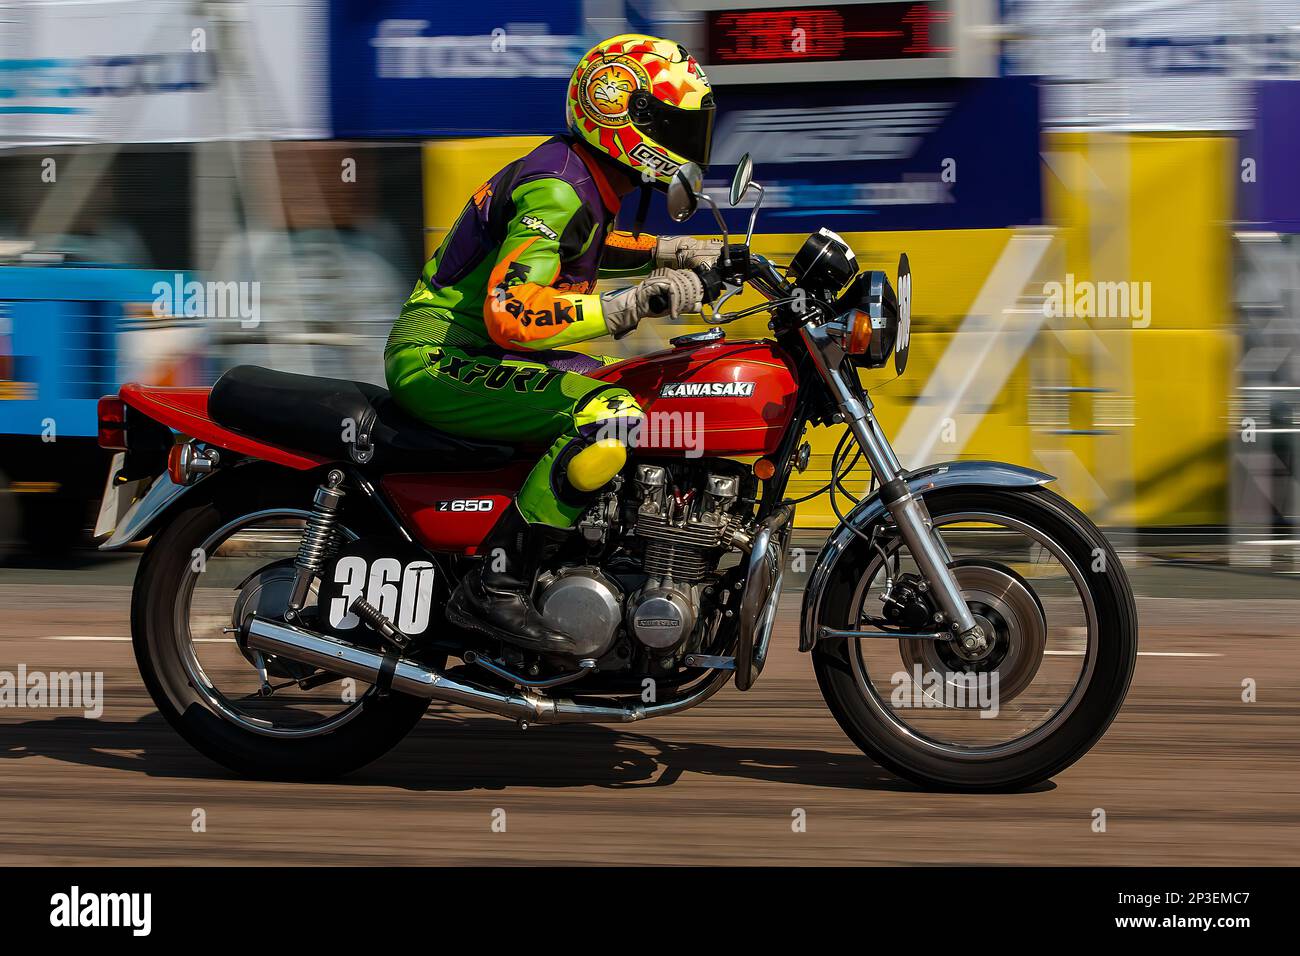 The event is currently run as a quarter mile sprint for both cars and motorcycles, held under the auspices of the Motor Sports Association. This image features Keith Masters riding a Kawasaki Z650. The event is organised by the Brighton and Hove Motor Club run along Madeira Drive, Brighton Sea Front, City of Brighton & Hove, UK. 2nd September 2017 Stock Photo